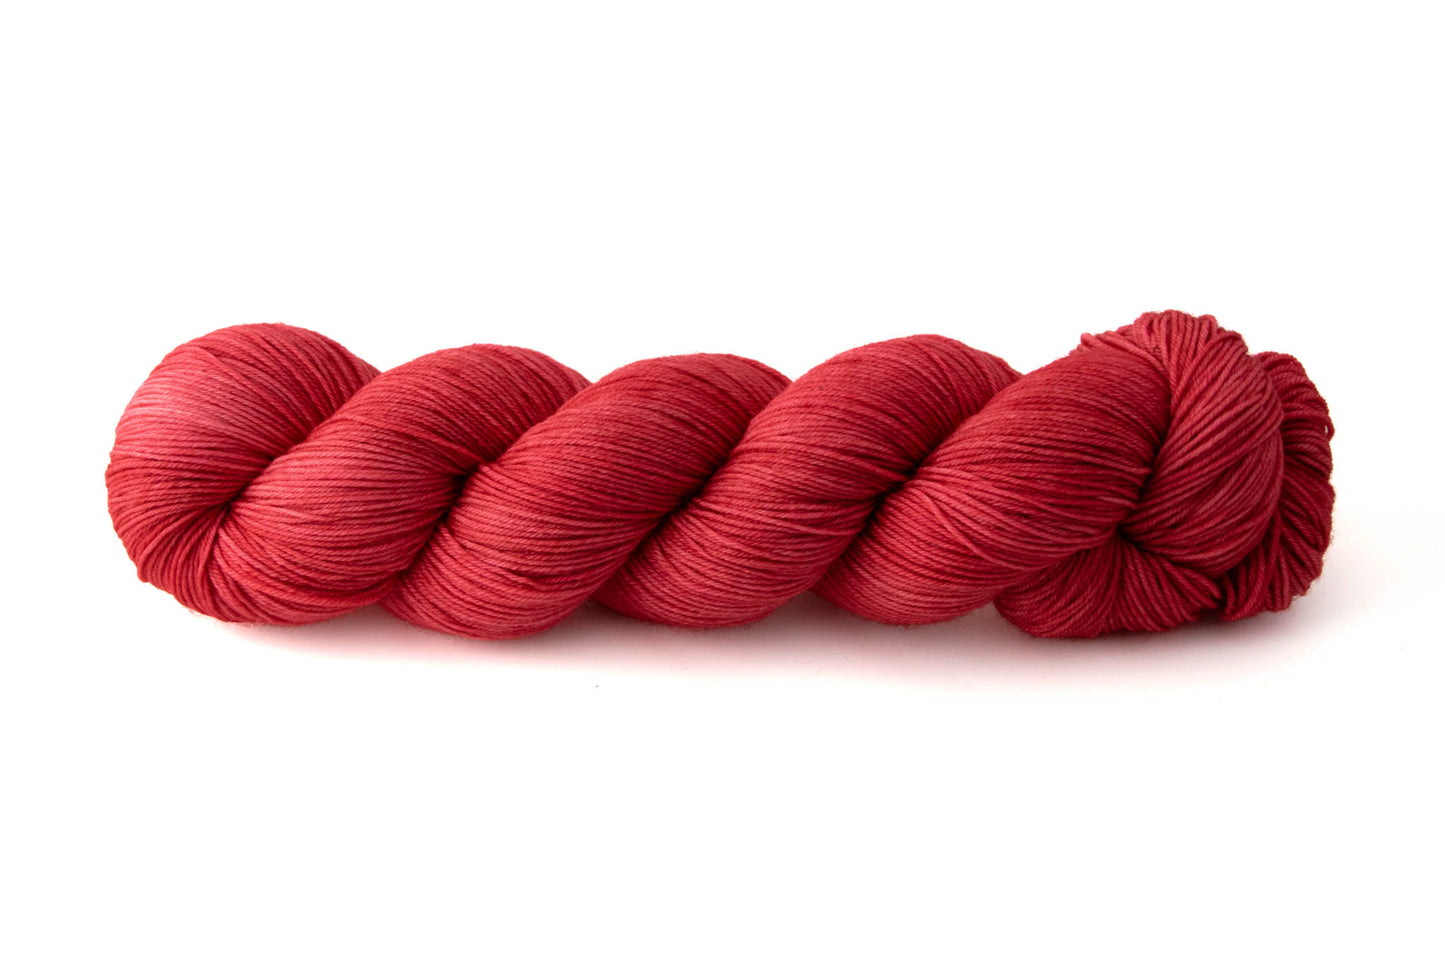 A bright red skein of tonal hand-dyed wool yarn.